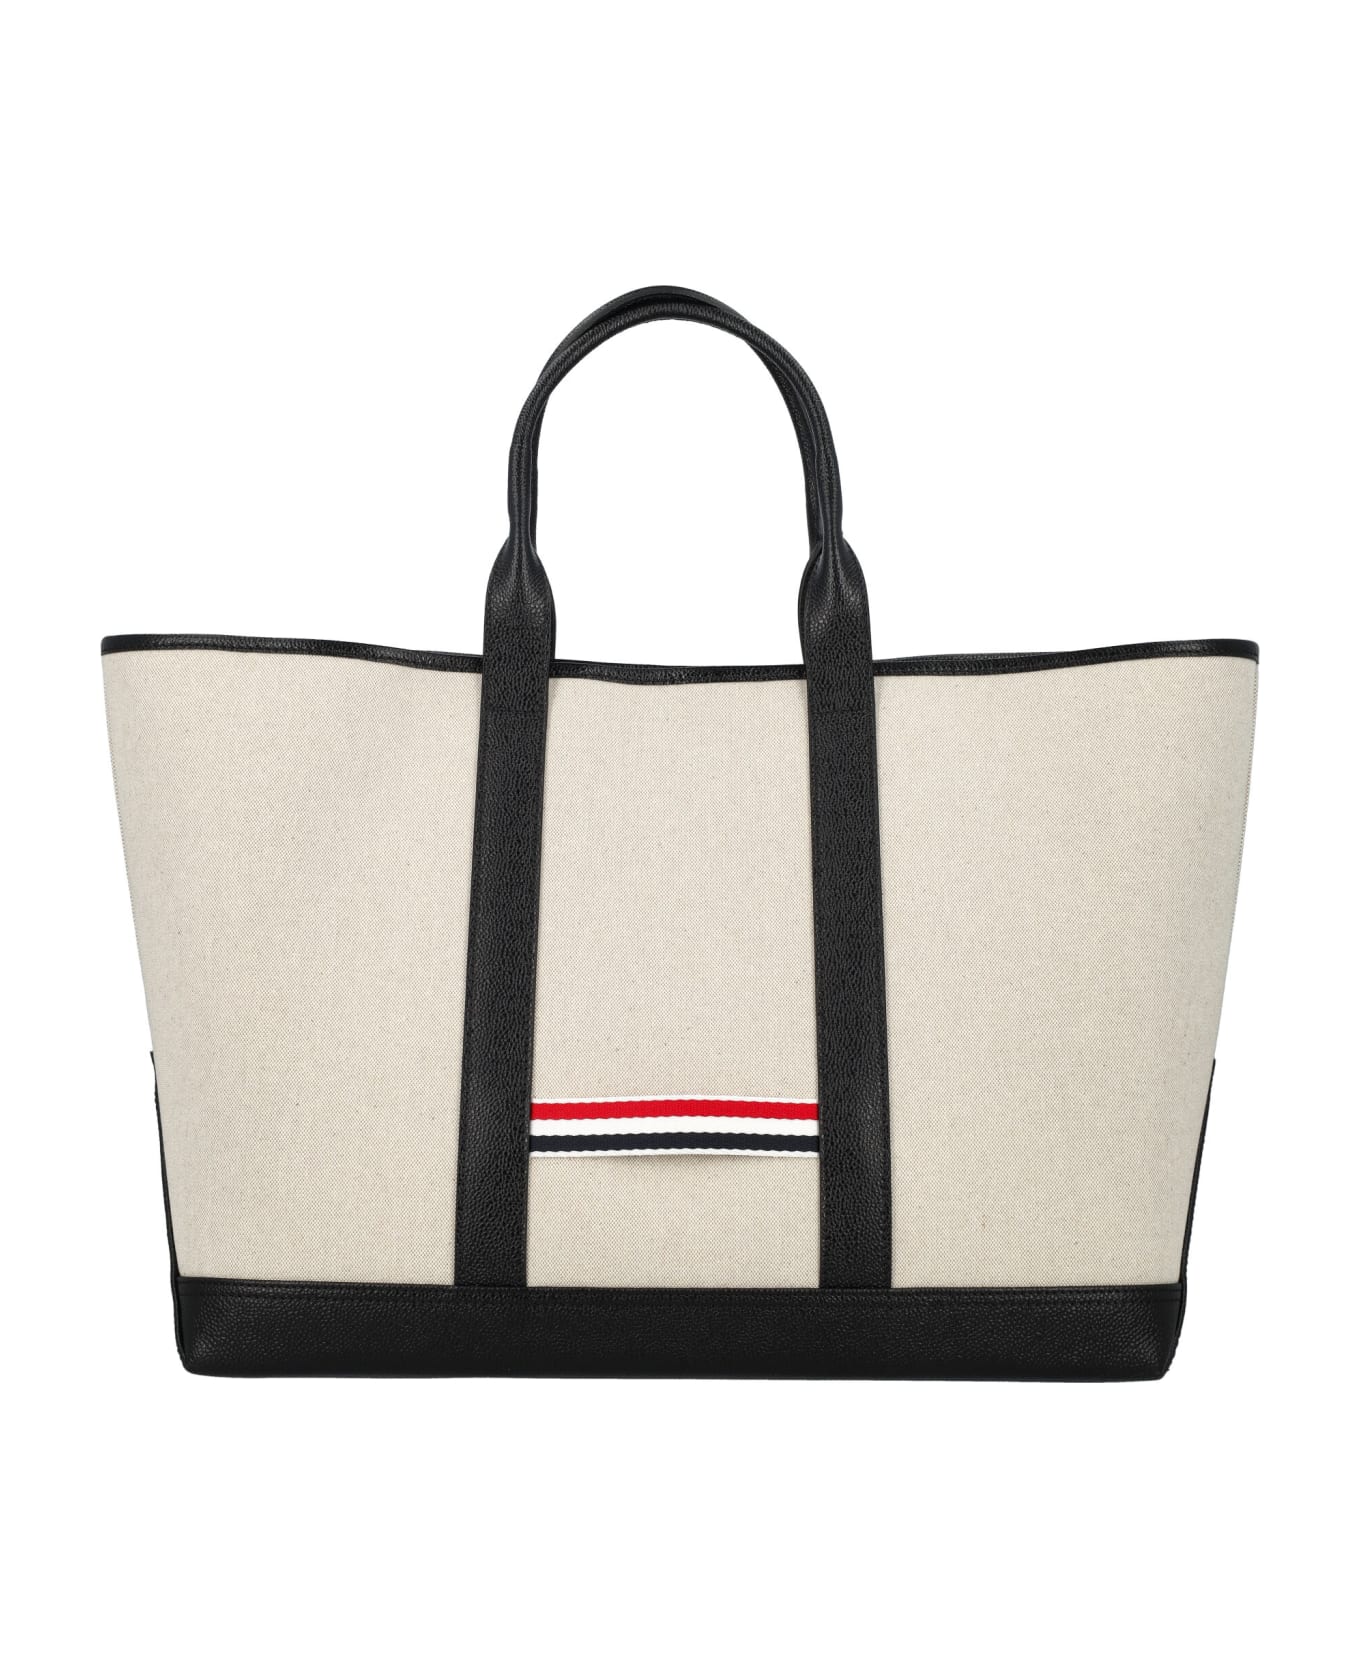 Thom Browne Medium Tool Tote W/ Leather Handles In S - NATURAL\BLACK トートバッグ